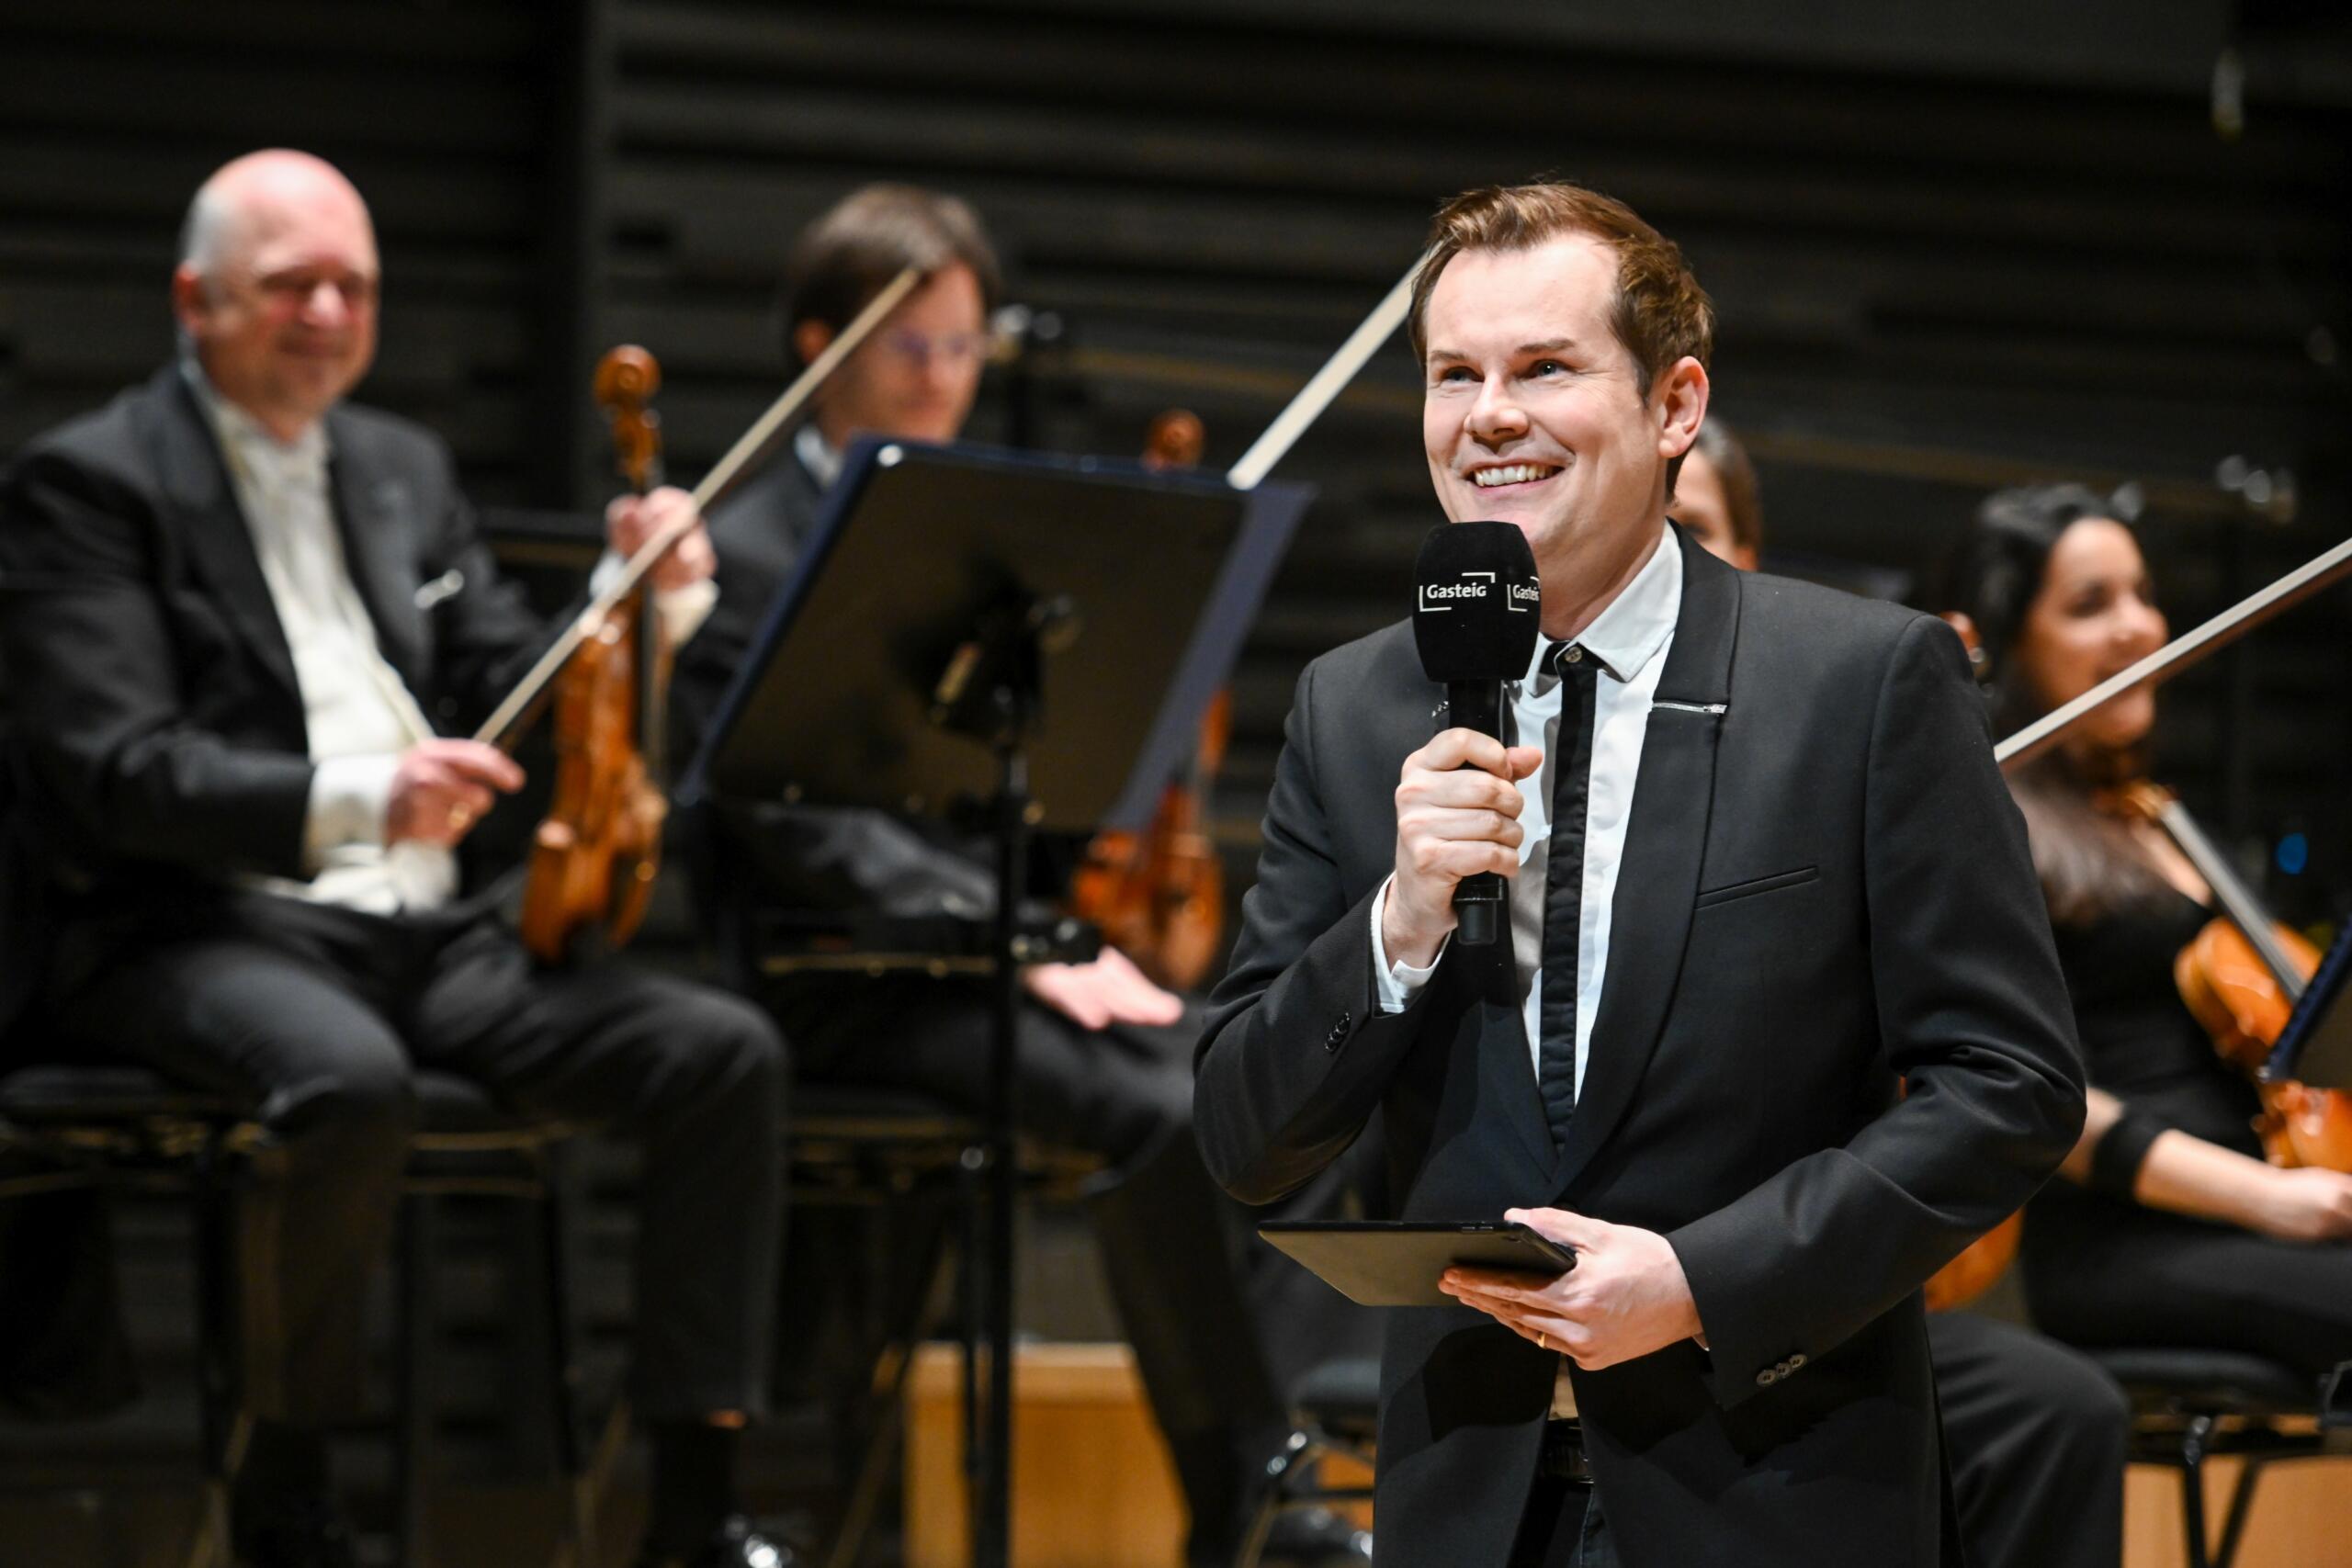 Malte Arkona smiling with microphone on the stage of the Isarphilharmonie. Members of the orchestra can be seen in the background.